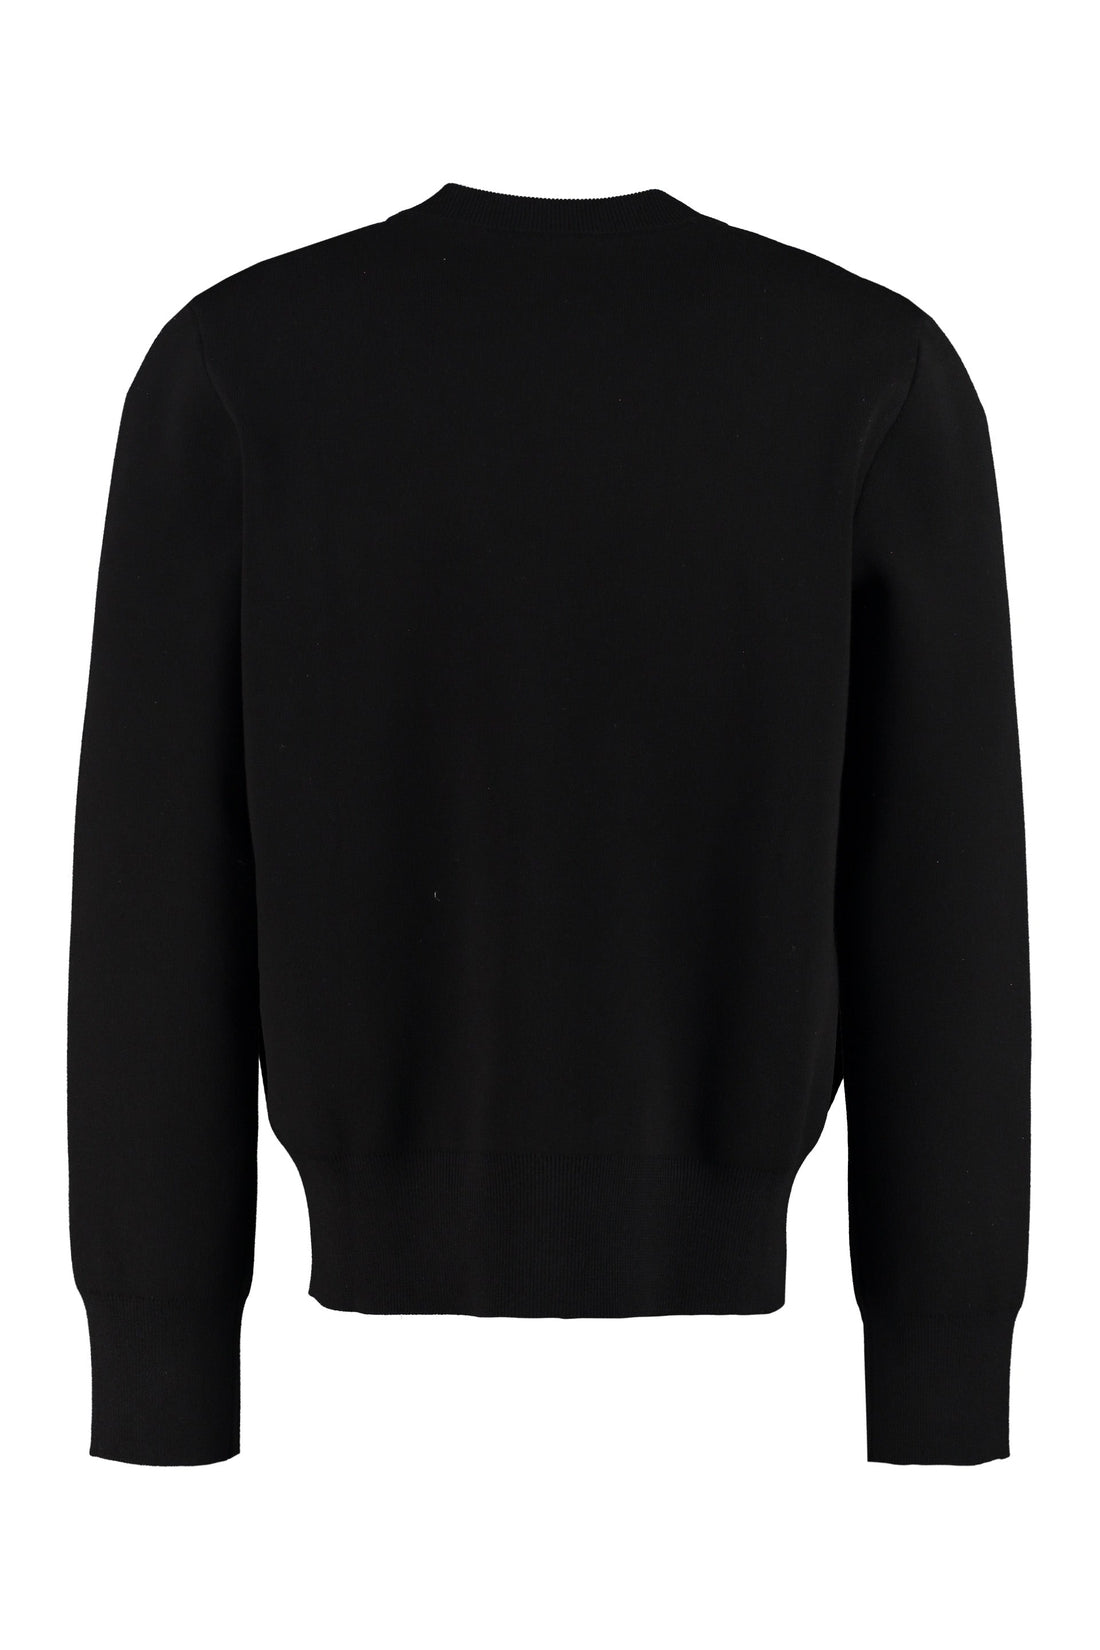 Givenchy-OUTLET-SALE-Long sleeve crew-neck sweater-ARCHIVIST